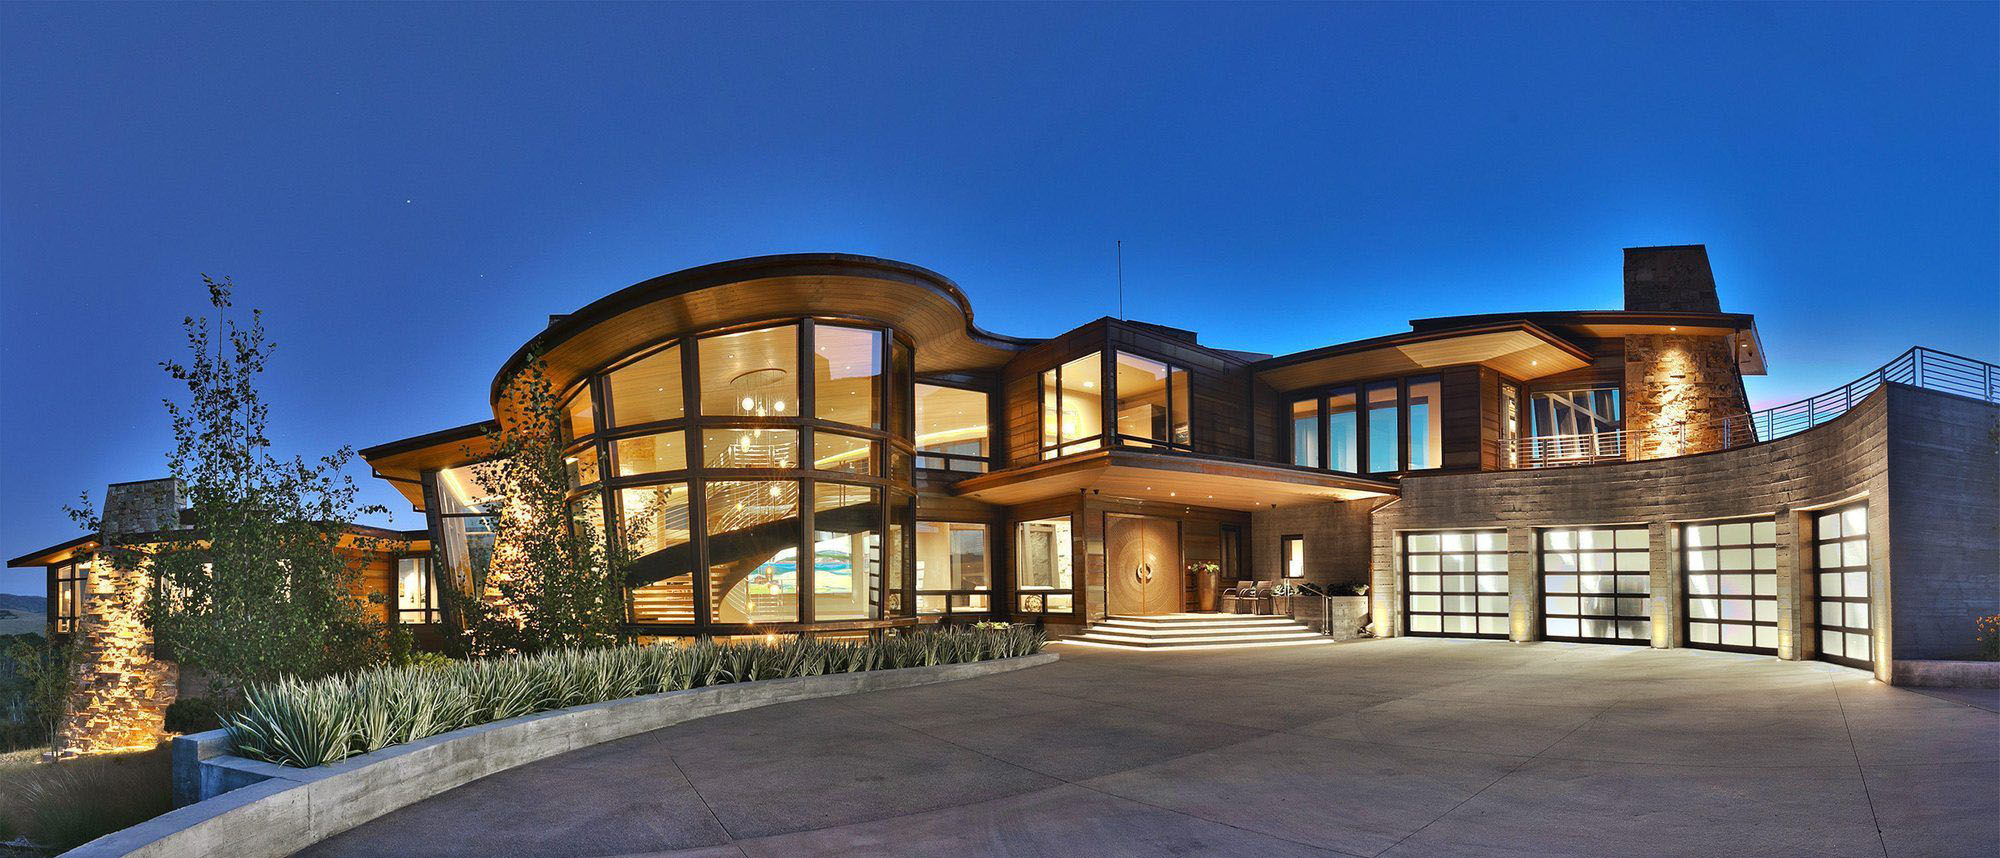 Custom modern home with a mix of wood and stone siding. Huge floor to ceiling windows. Wood soffits.